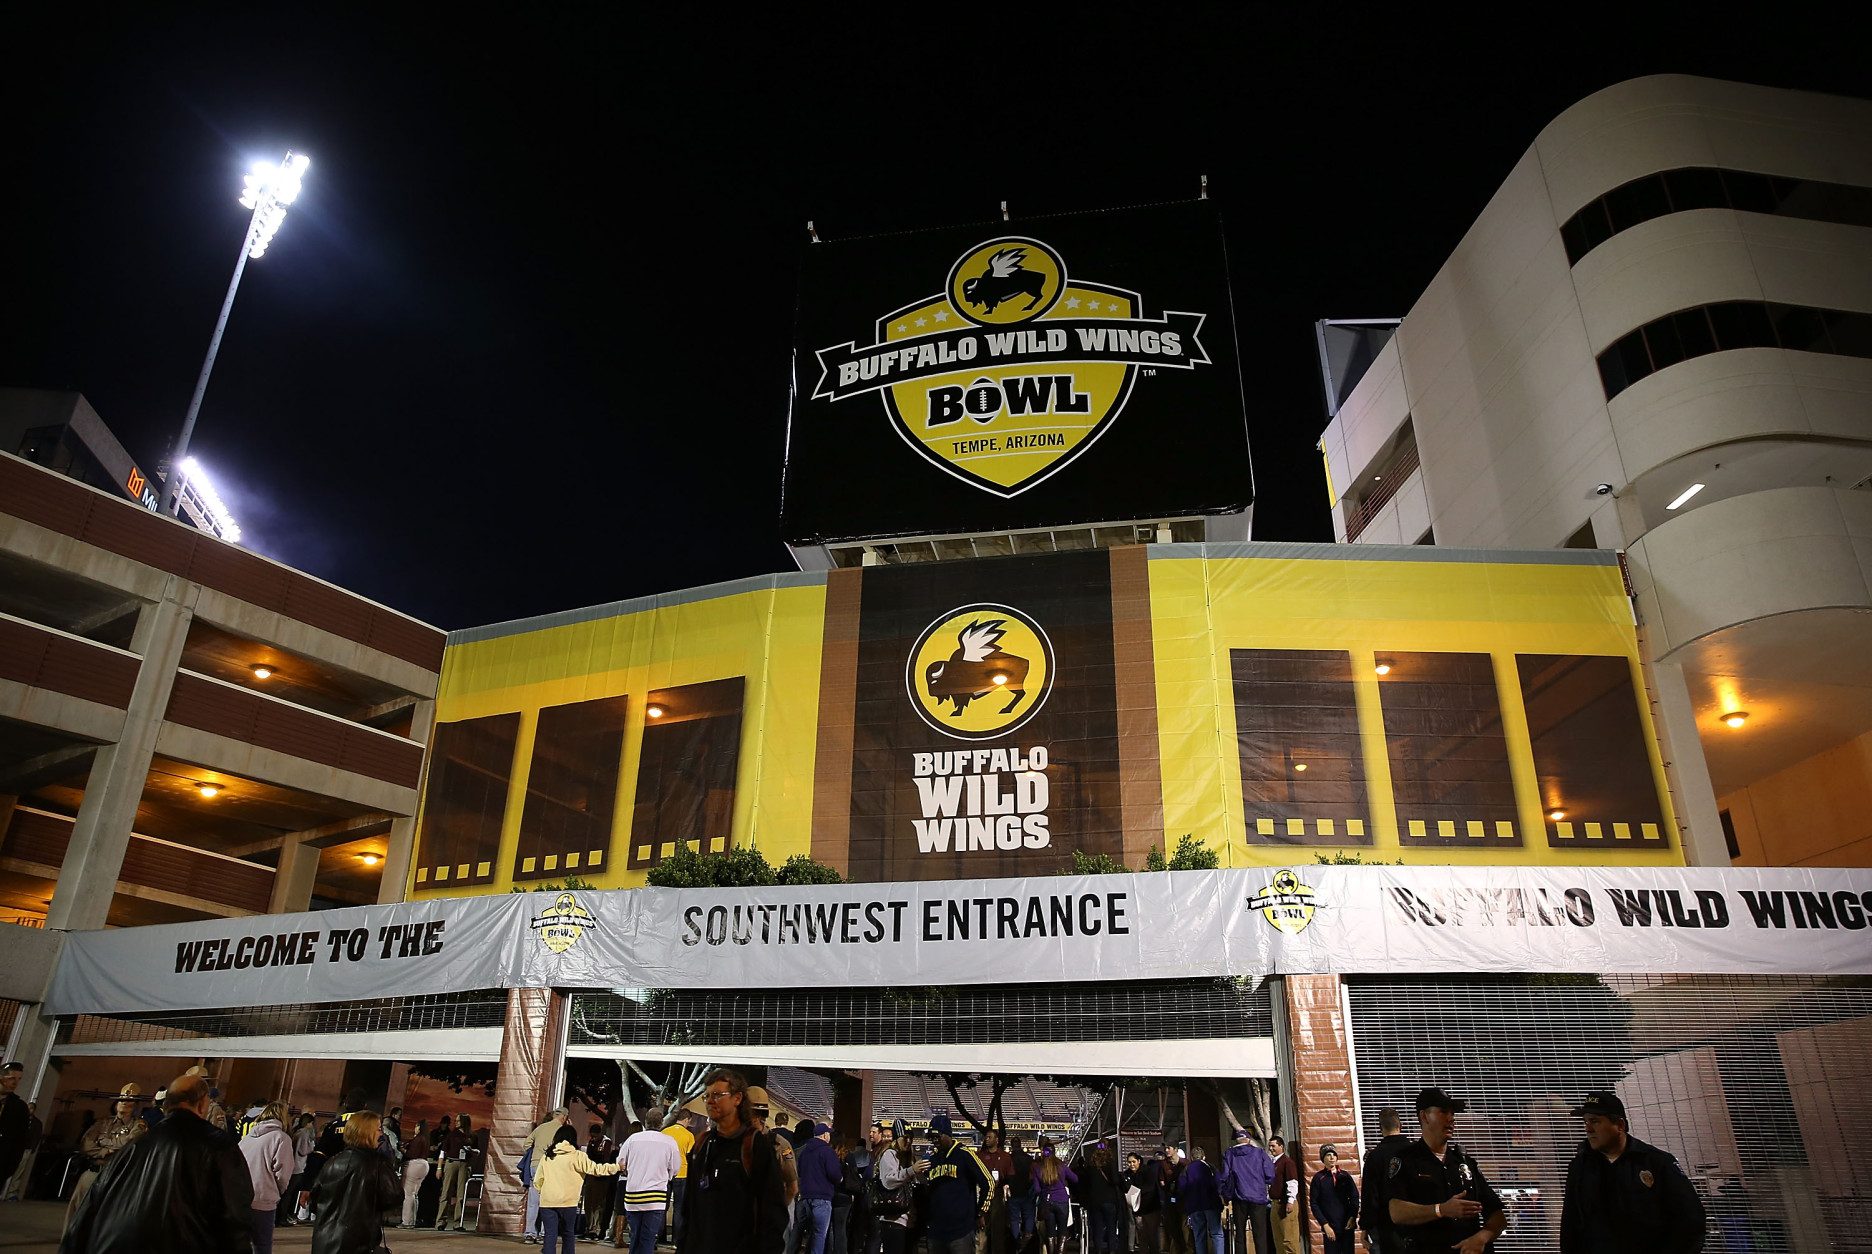 TEMPE, AZ - DECEMBER 28:  General view of Sun Devil Stadium before the Buffalo Wild Wings Bowl between the Michigan Wolverines and the Kansas State Wildcats on December 28, 2013 in Tempe, Arizona.  (Photo by Christian Petersen/Getty Images)